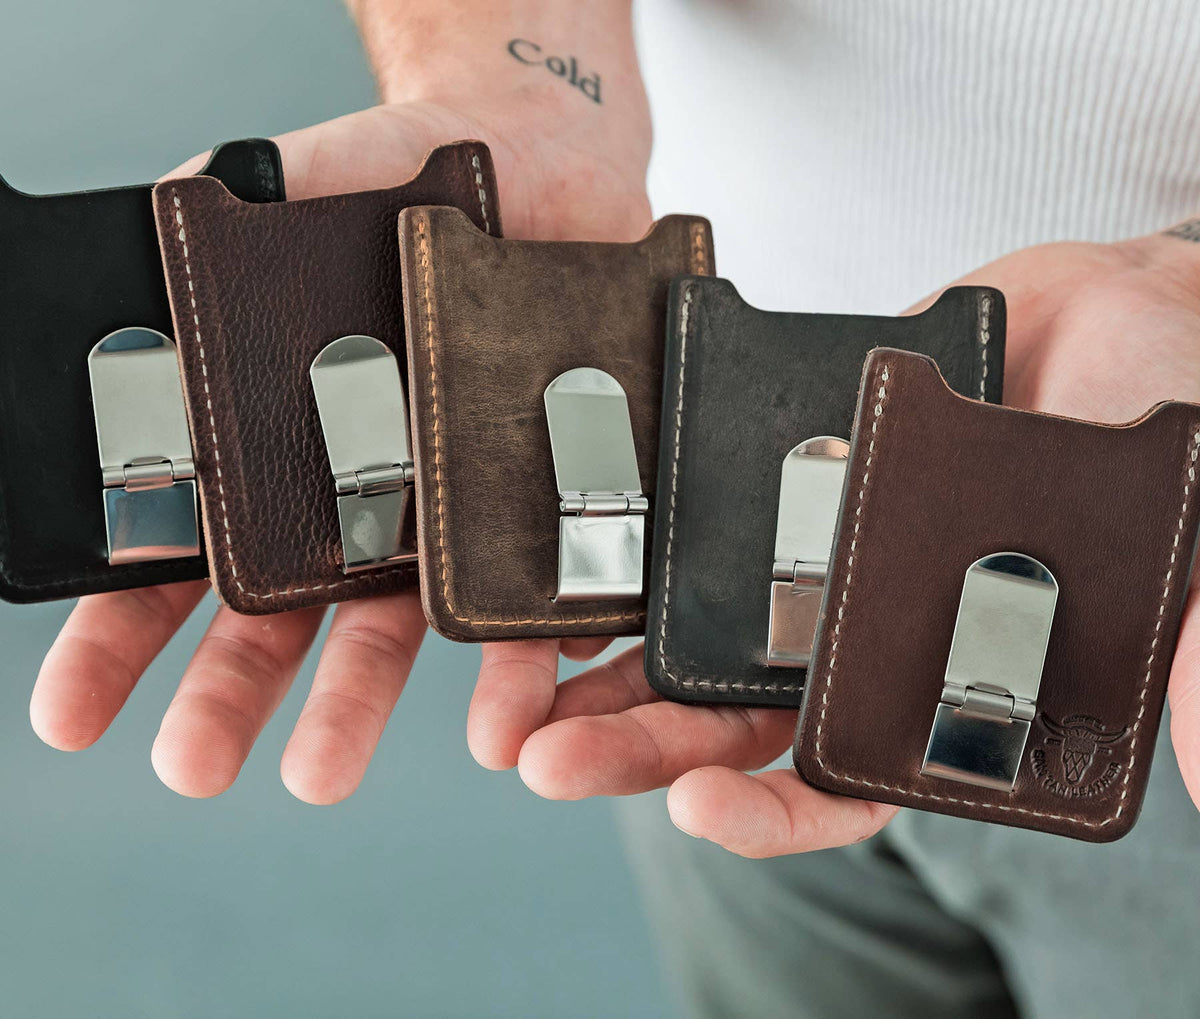 The Left Coast Money Clip - Our Classic Personalized Leather Money